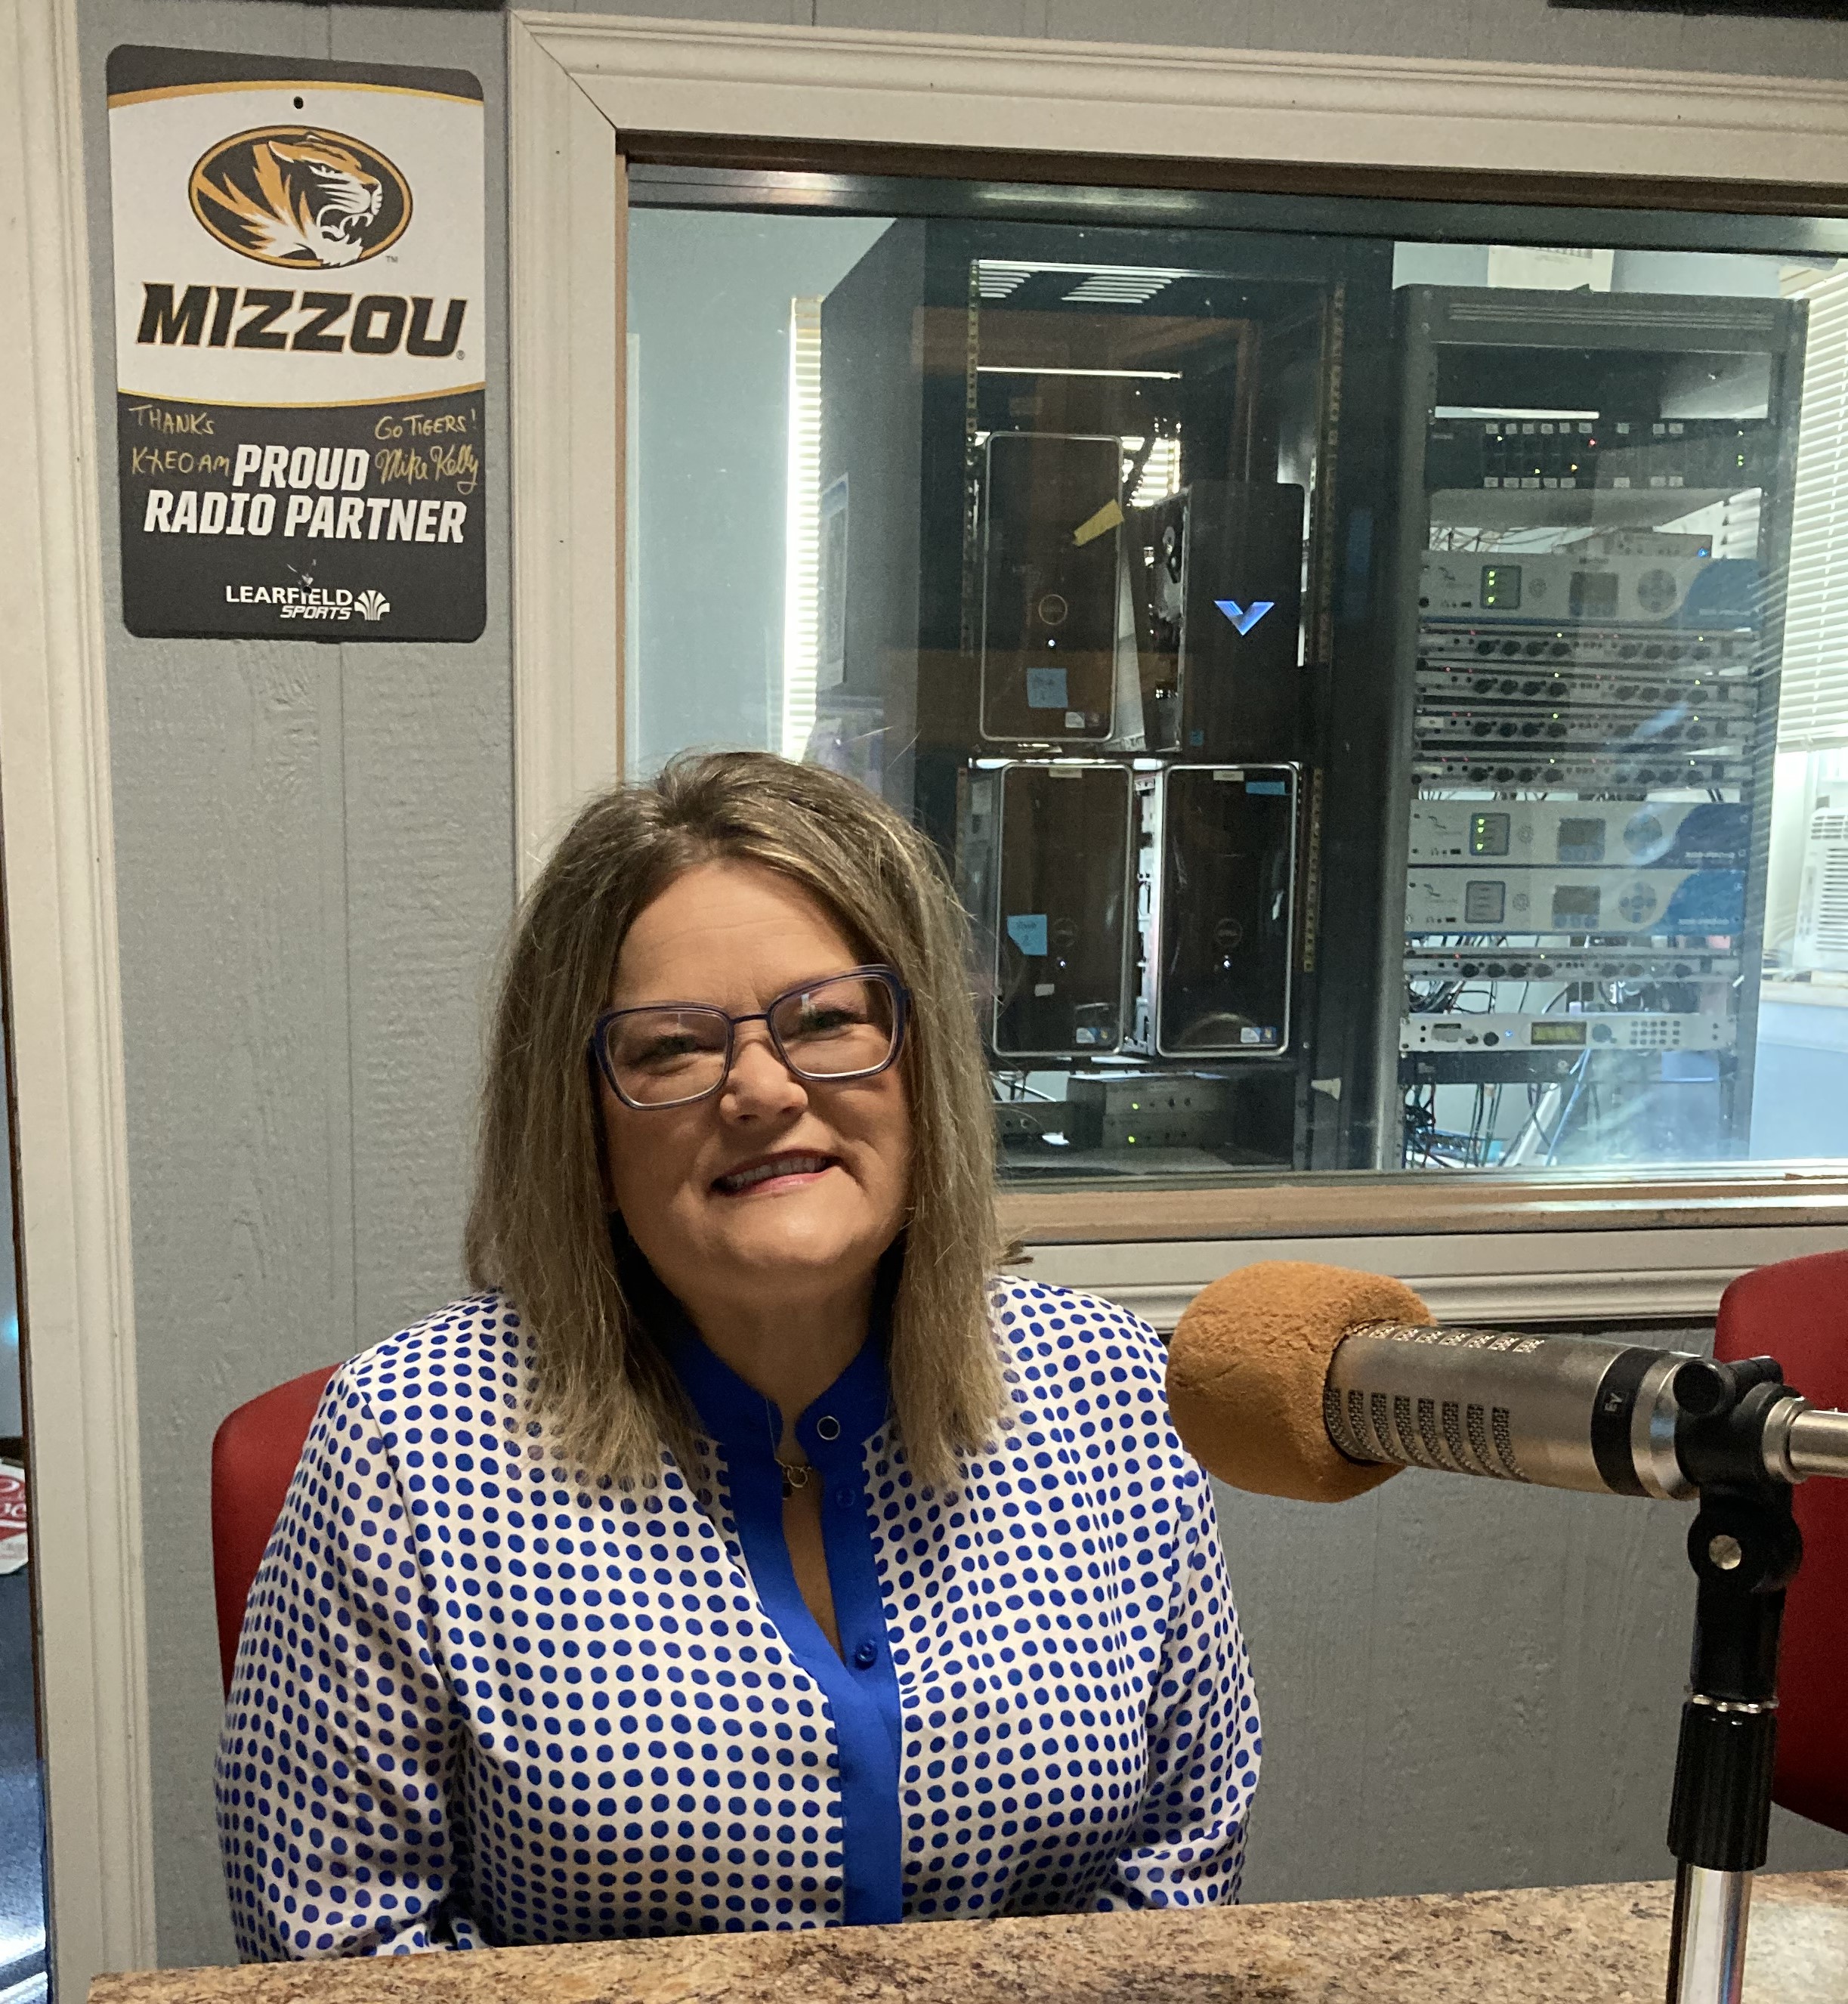 Moberly High School Principal Deb Haag Featured Local Guest On KXEO And KWWR Morning Shows